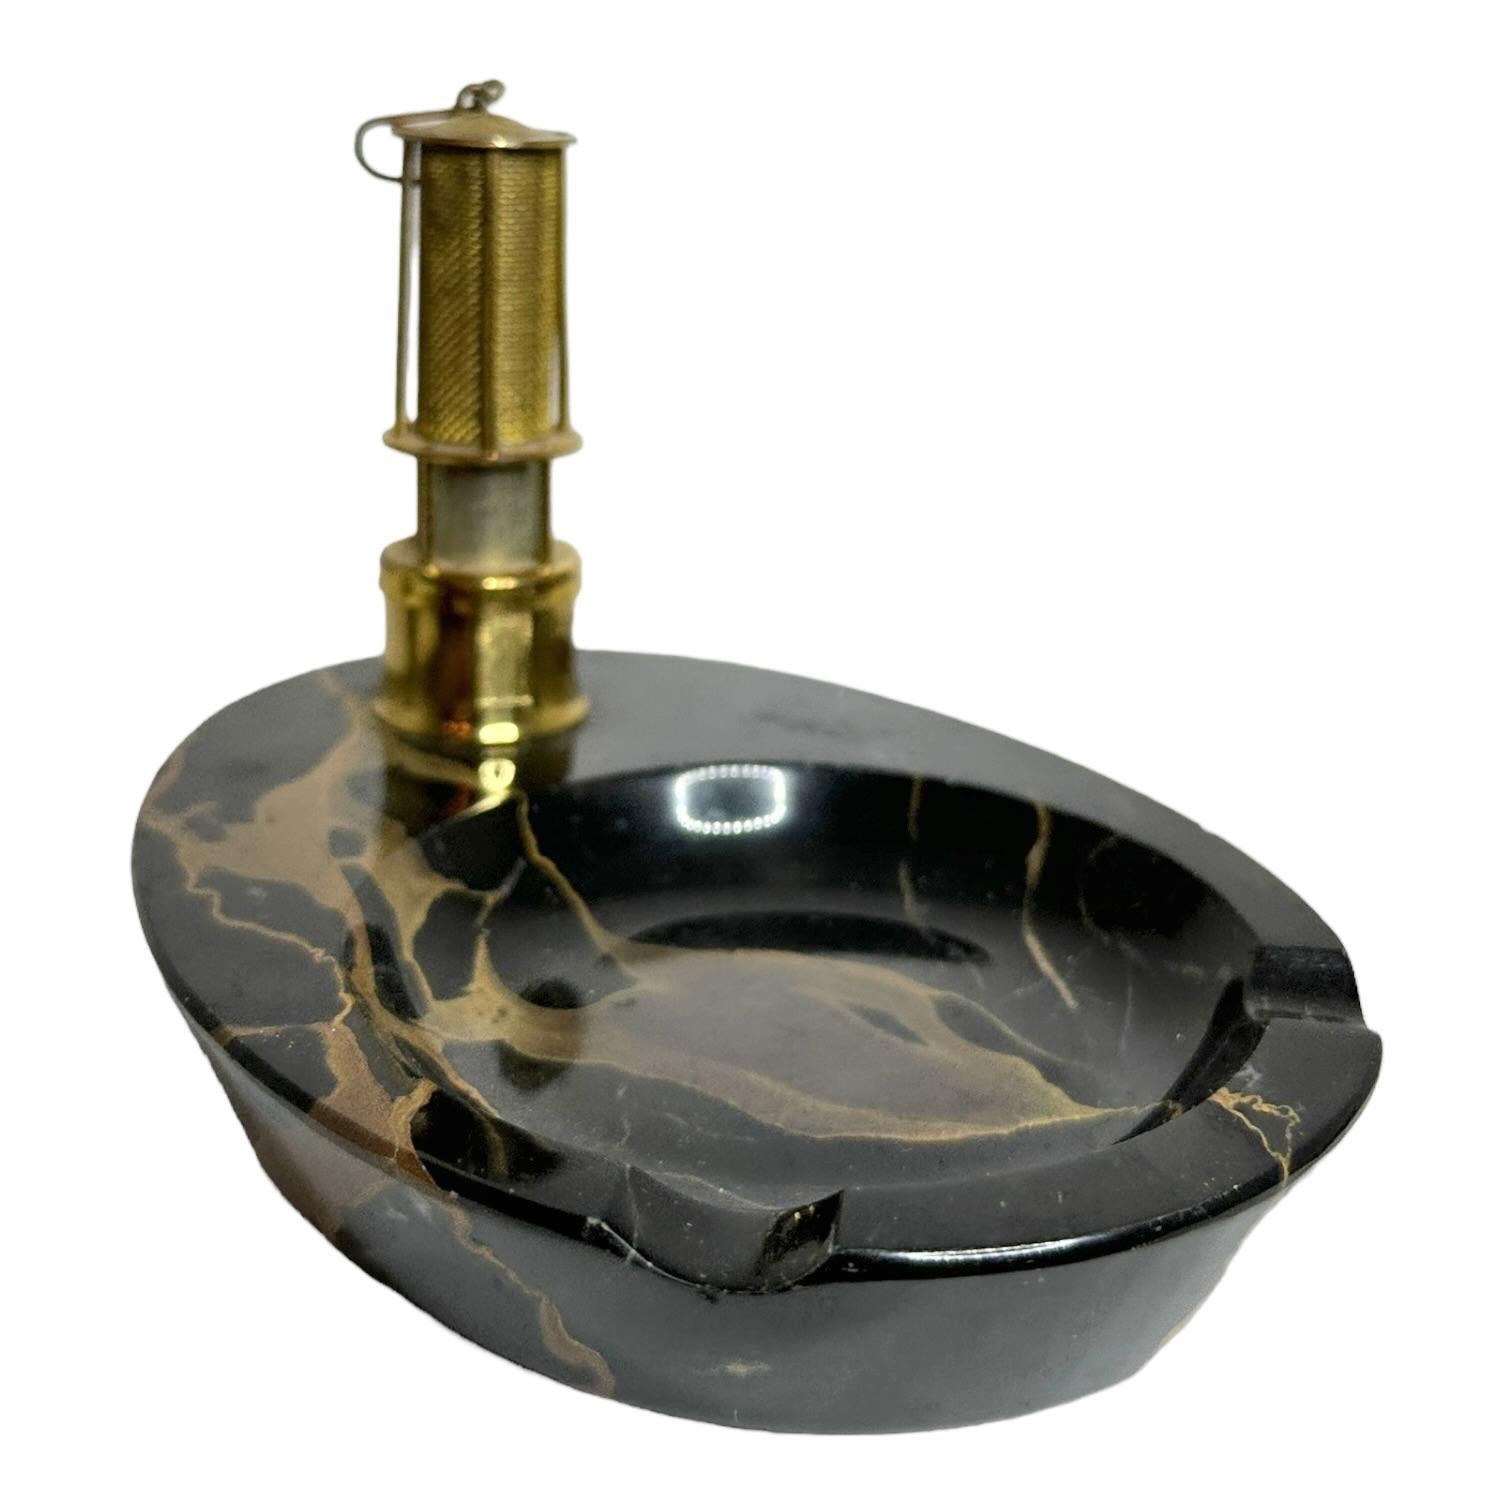 Classic 1920s Art Deco Winners Lantern lighter on Marble Pedestal Ashtray. This exquisite German Art Deco ashtray is a testament to the opulence and craftsmanship of the early 20th century. 
The base of the ashtray is fashioned from pristine black 